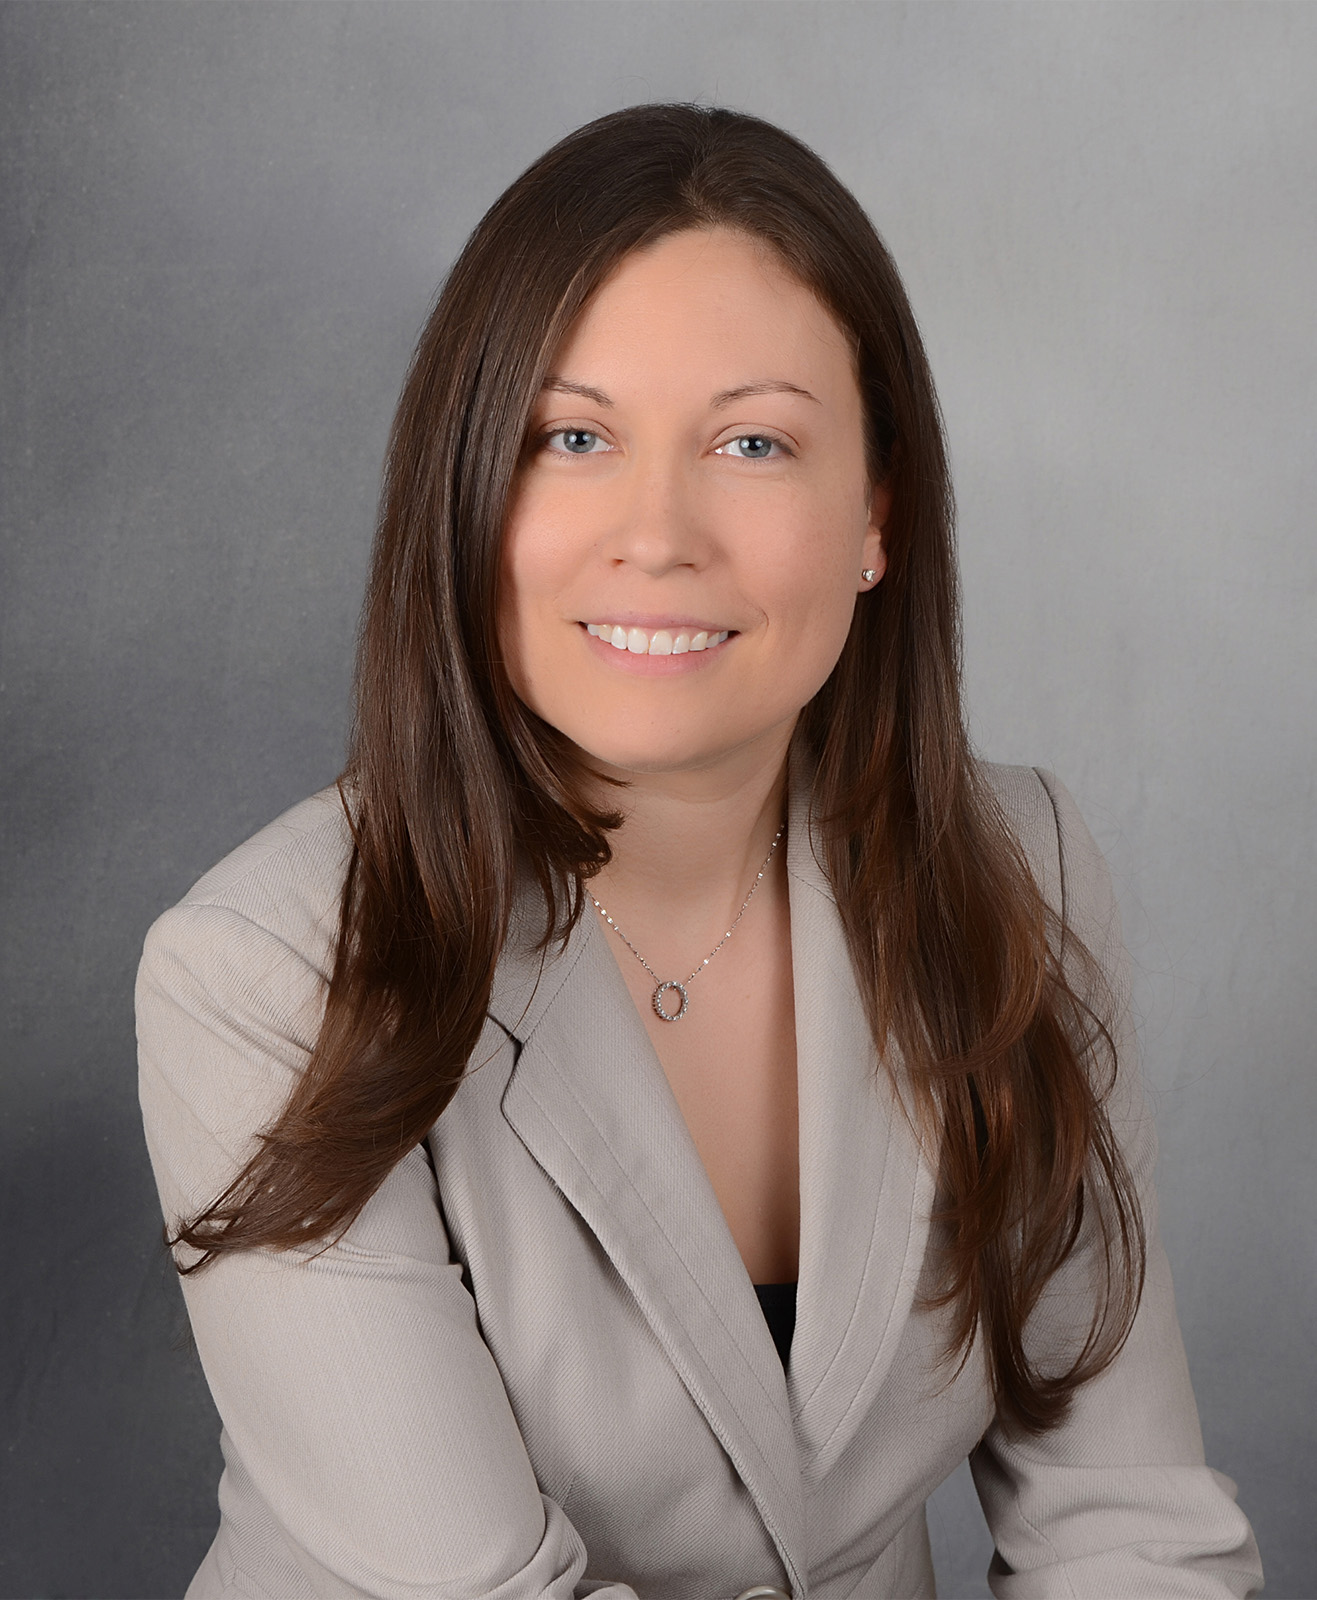 Tampa estate planning and family law attorney Erin M. Zides